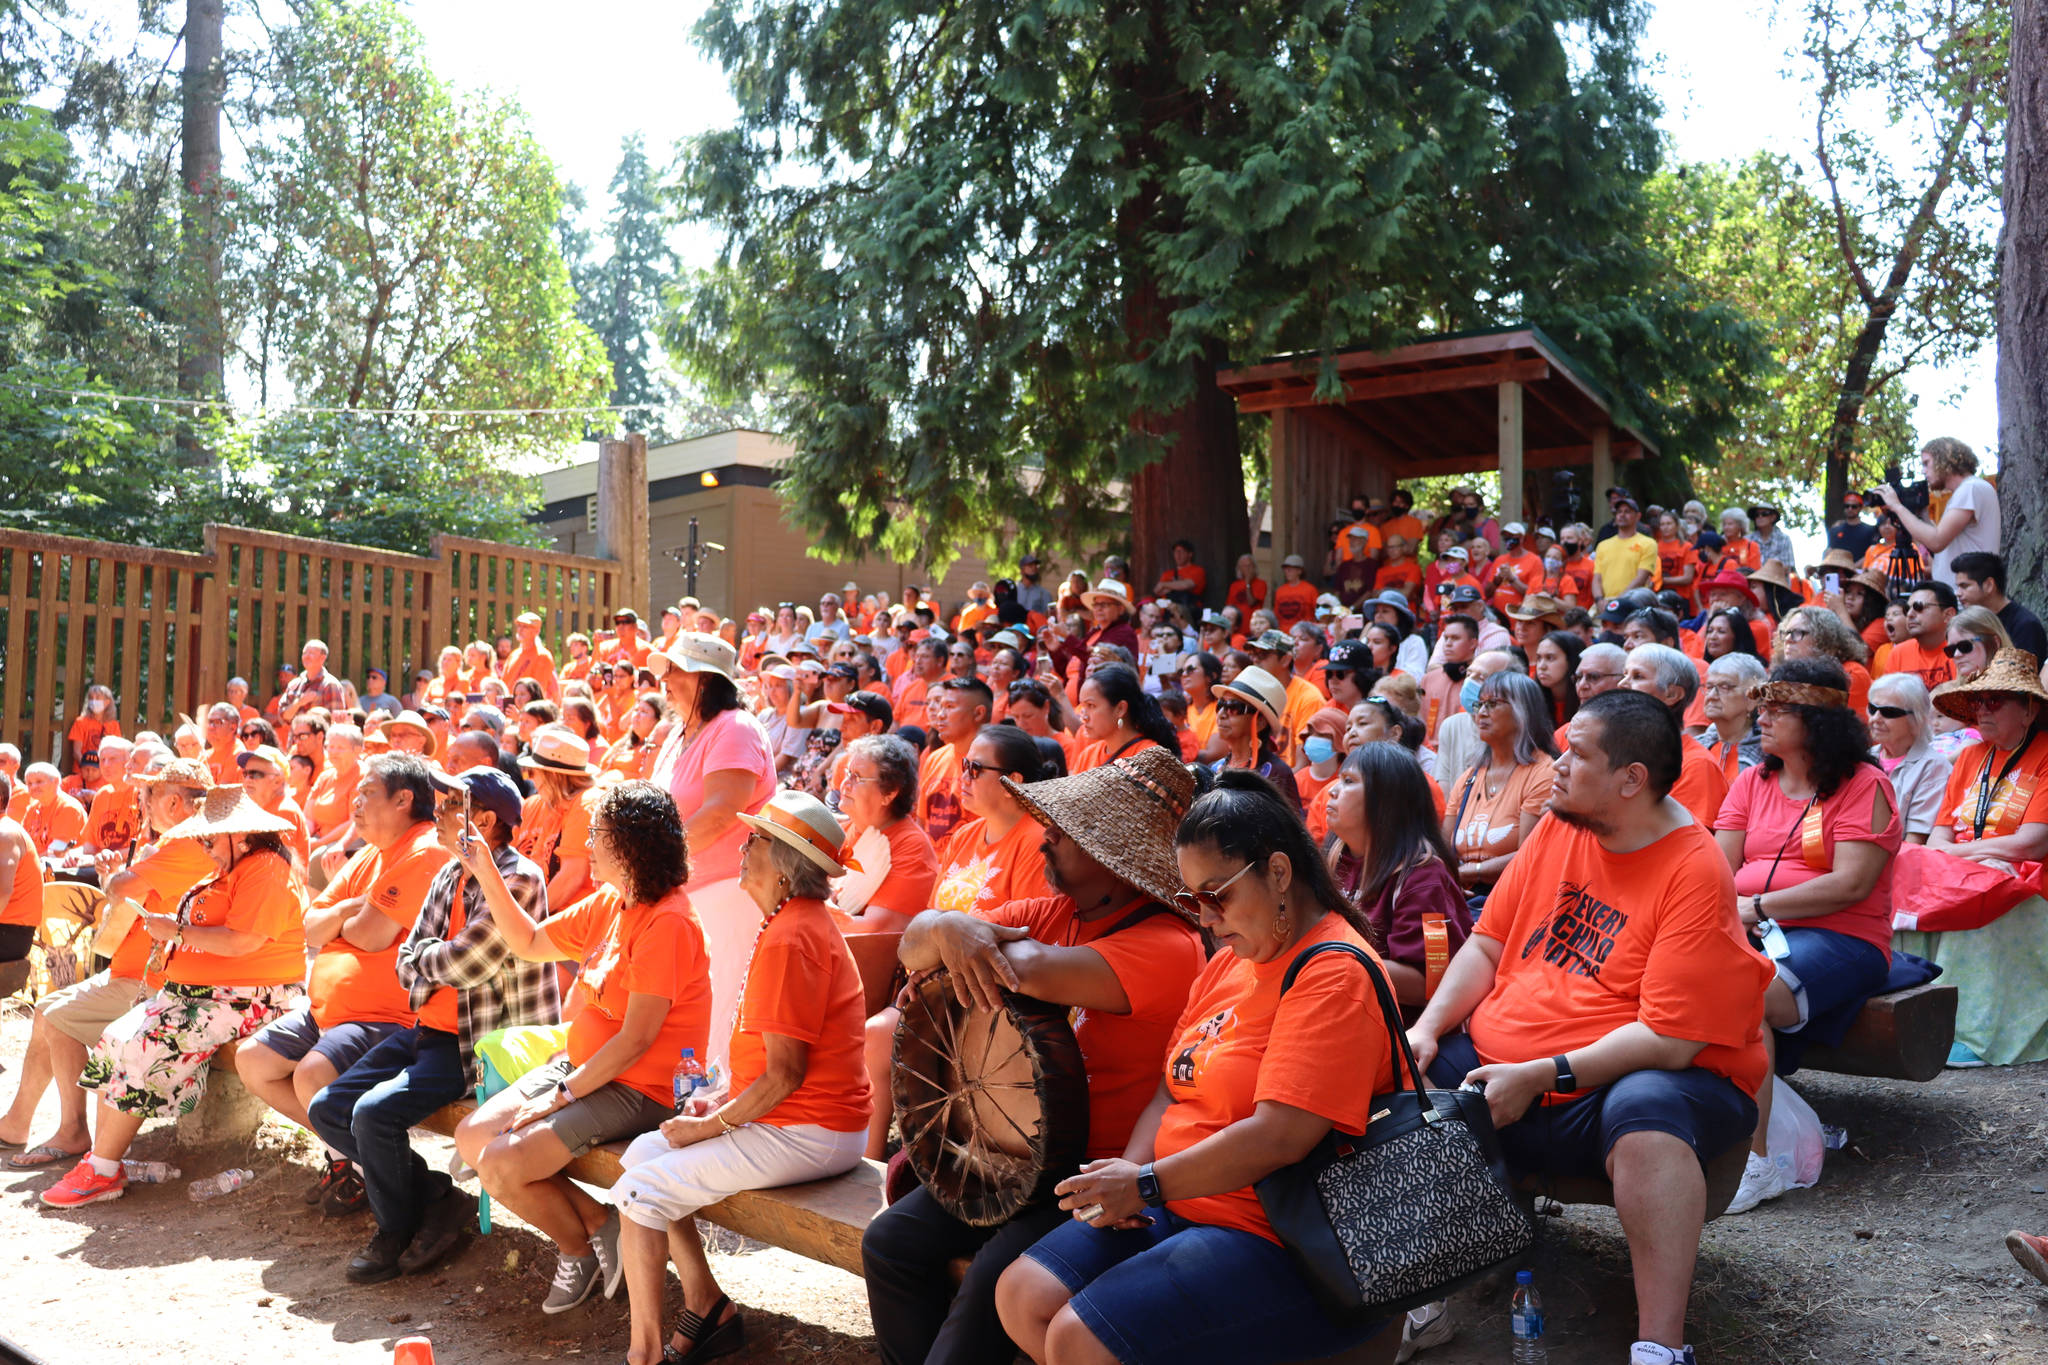 There was standing room only at Waterwheel Park as speakers shared their words with the crowd. (Cole Schisler photo)